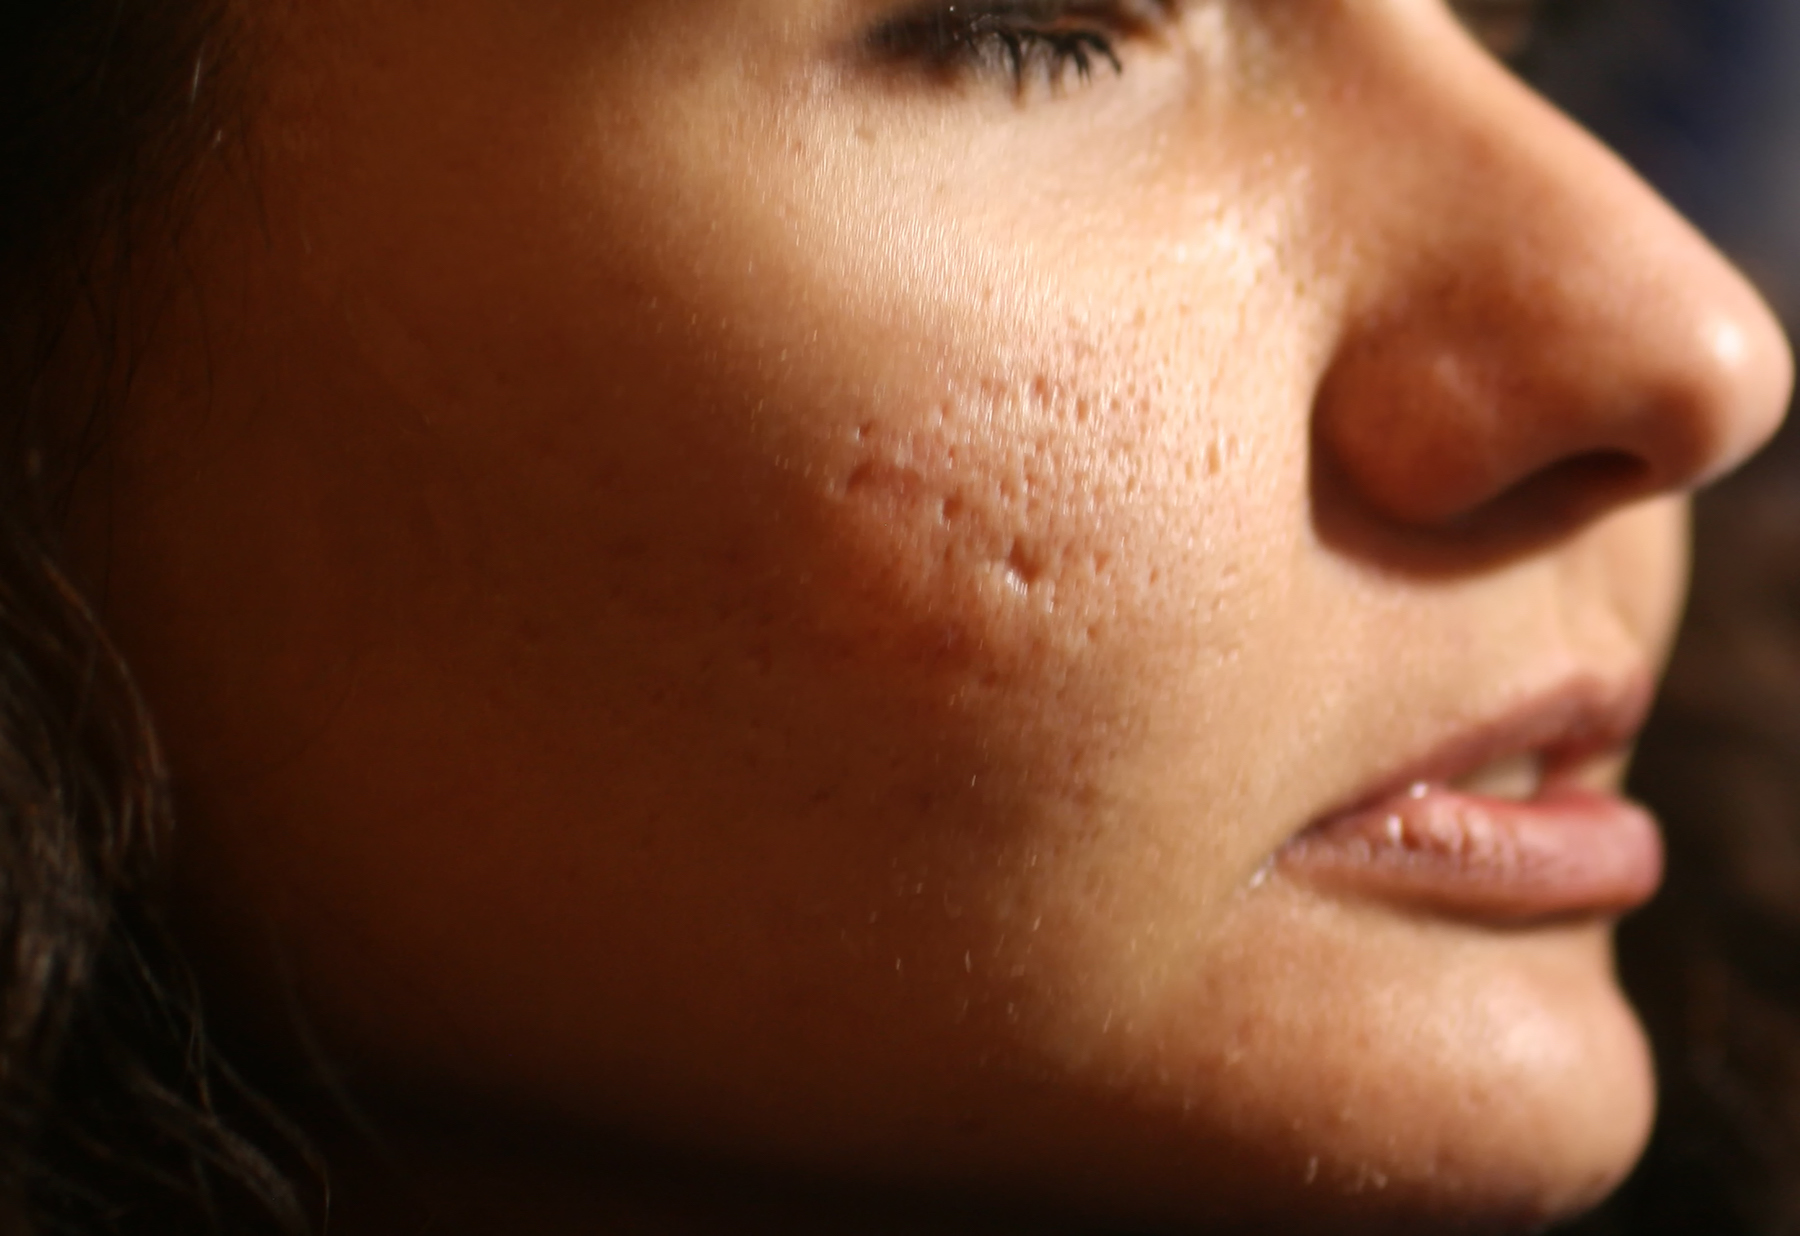 Inflamed skin of the face in pimples and acne. Keloid scars from acne.